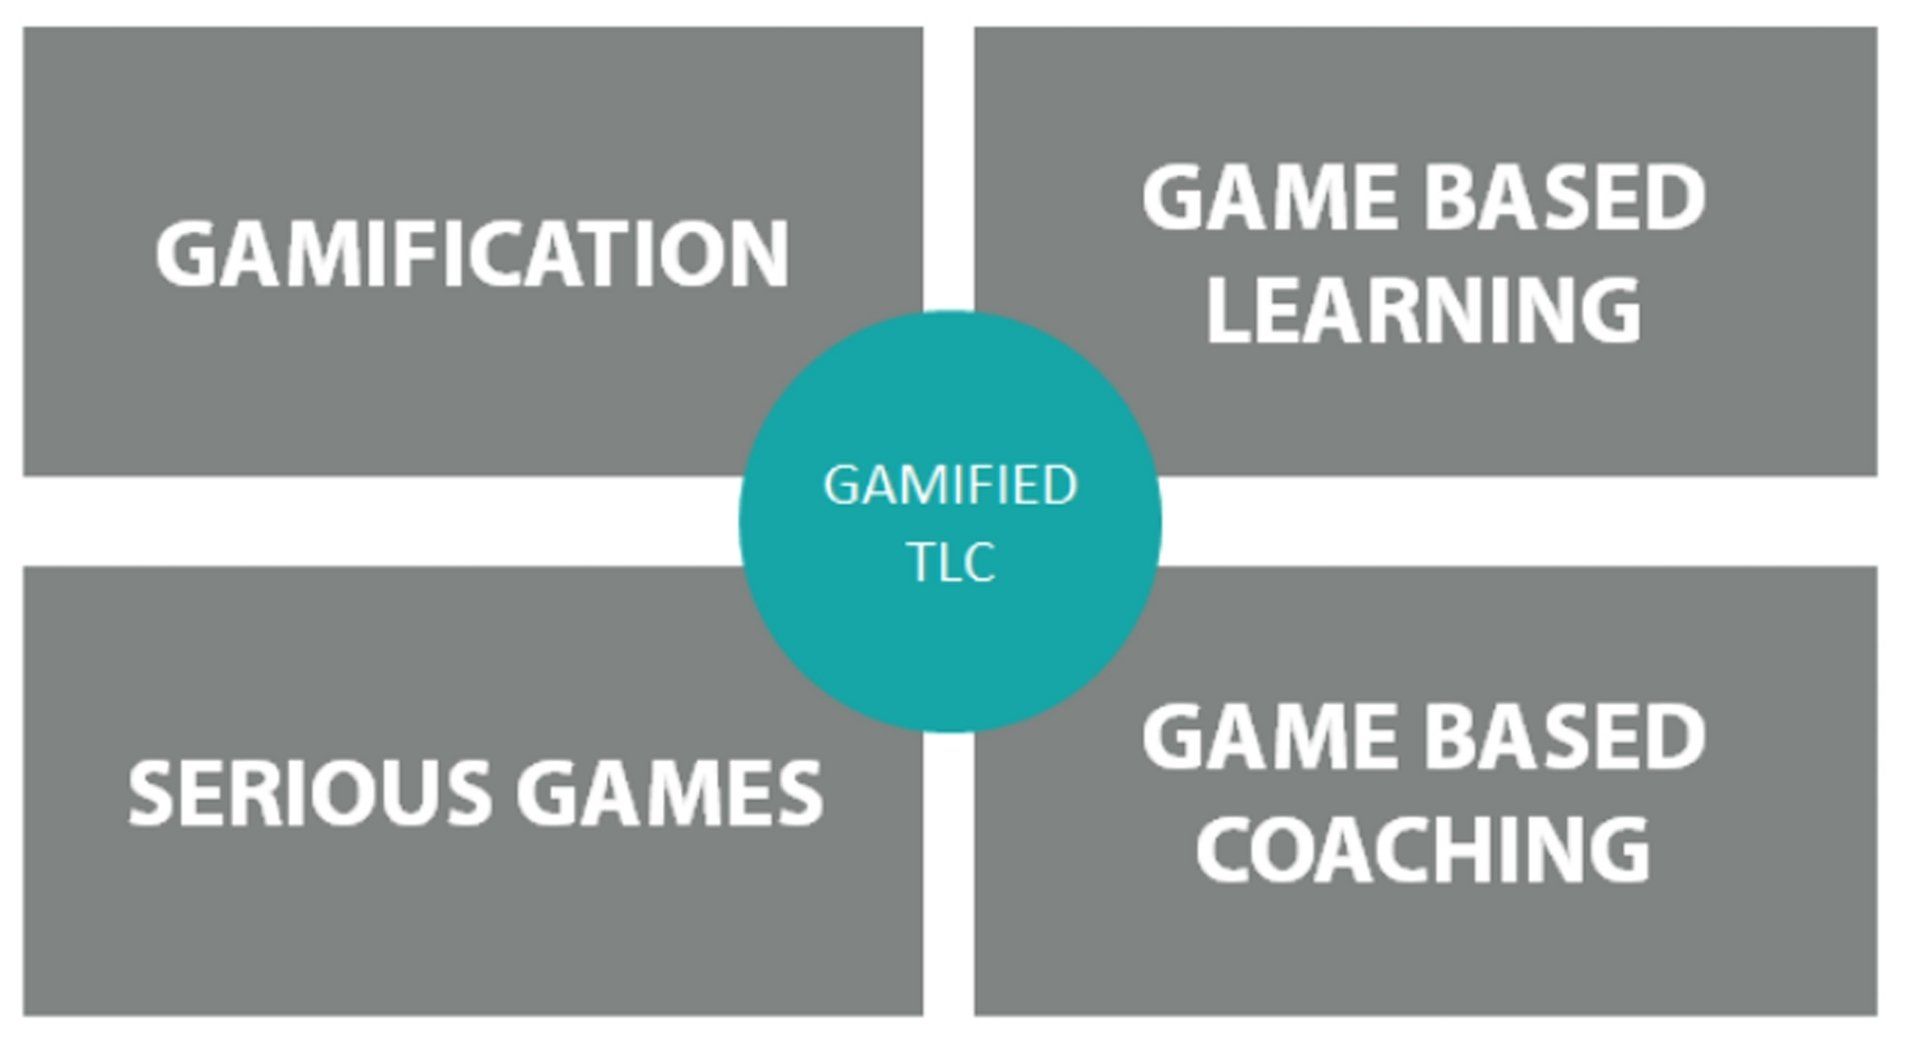 Verschil tussen gamification, game based learning, serious games en game based coaching